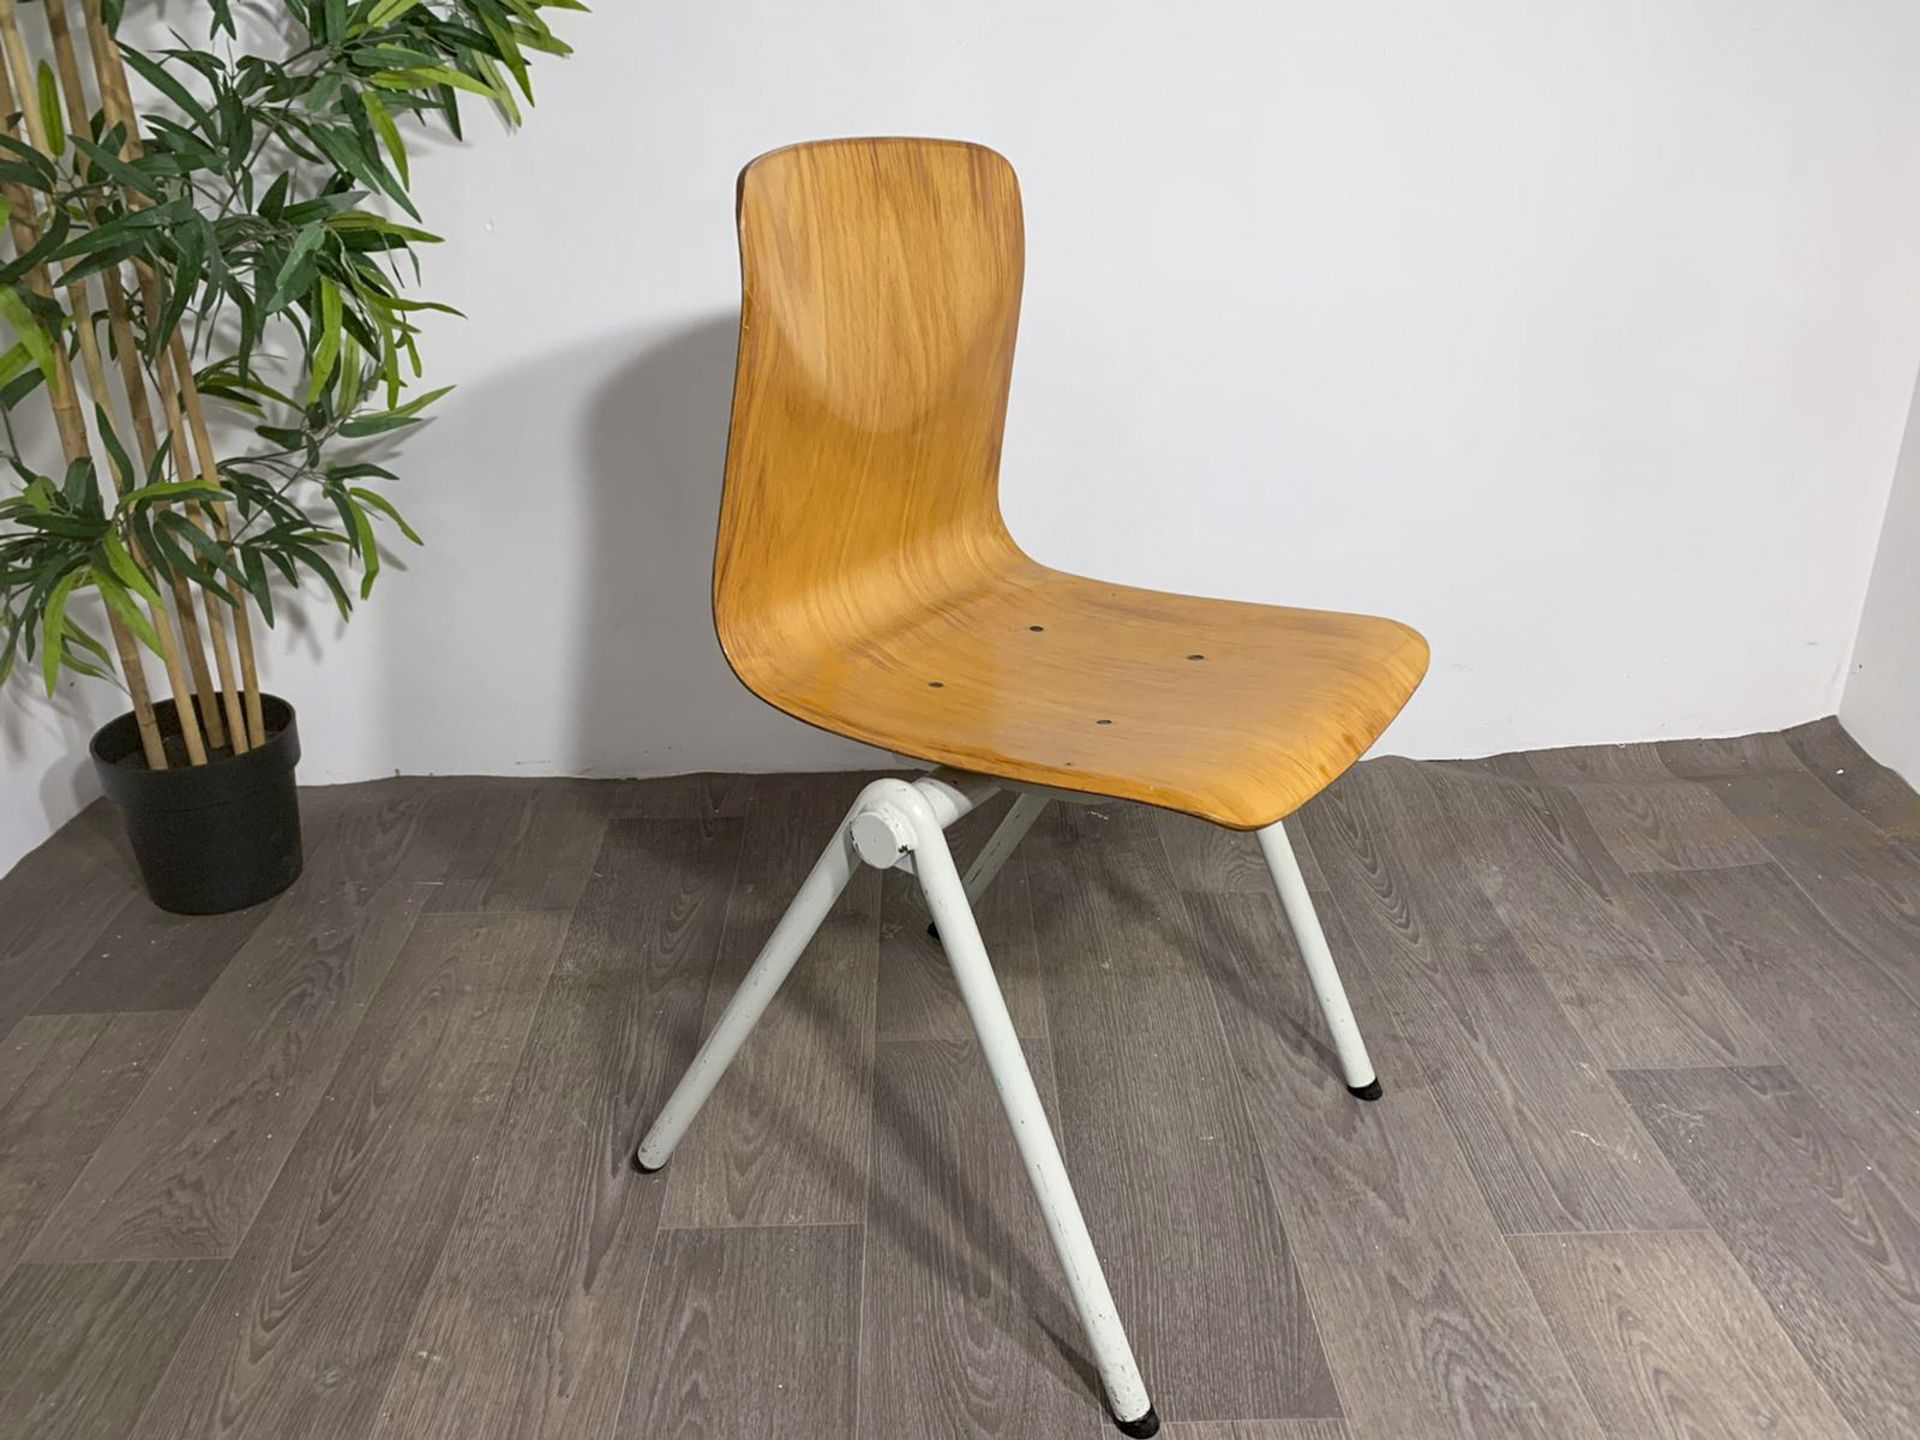 Mid Century Wooden Chair with Steel Legs - Image 6 of 9